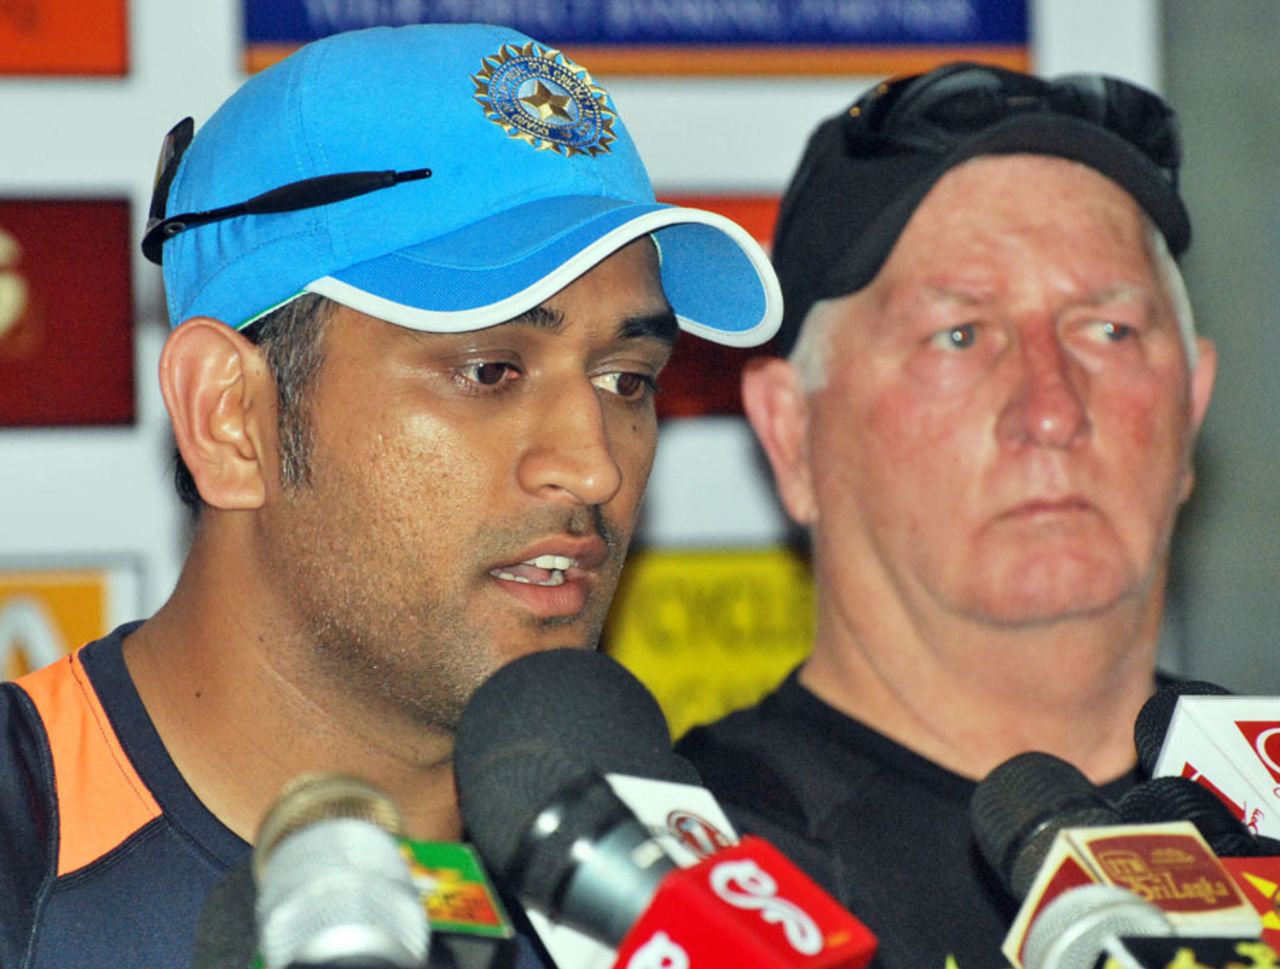 MS Dhoni with Duncan Fletcher at a press conference in Colombo, July 18, 2012